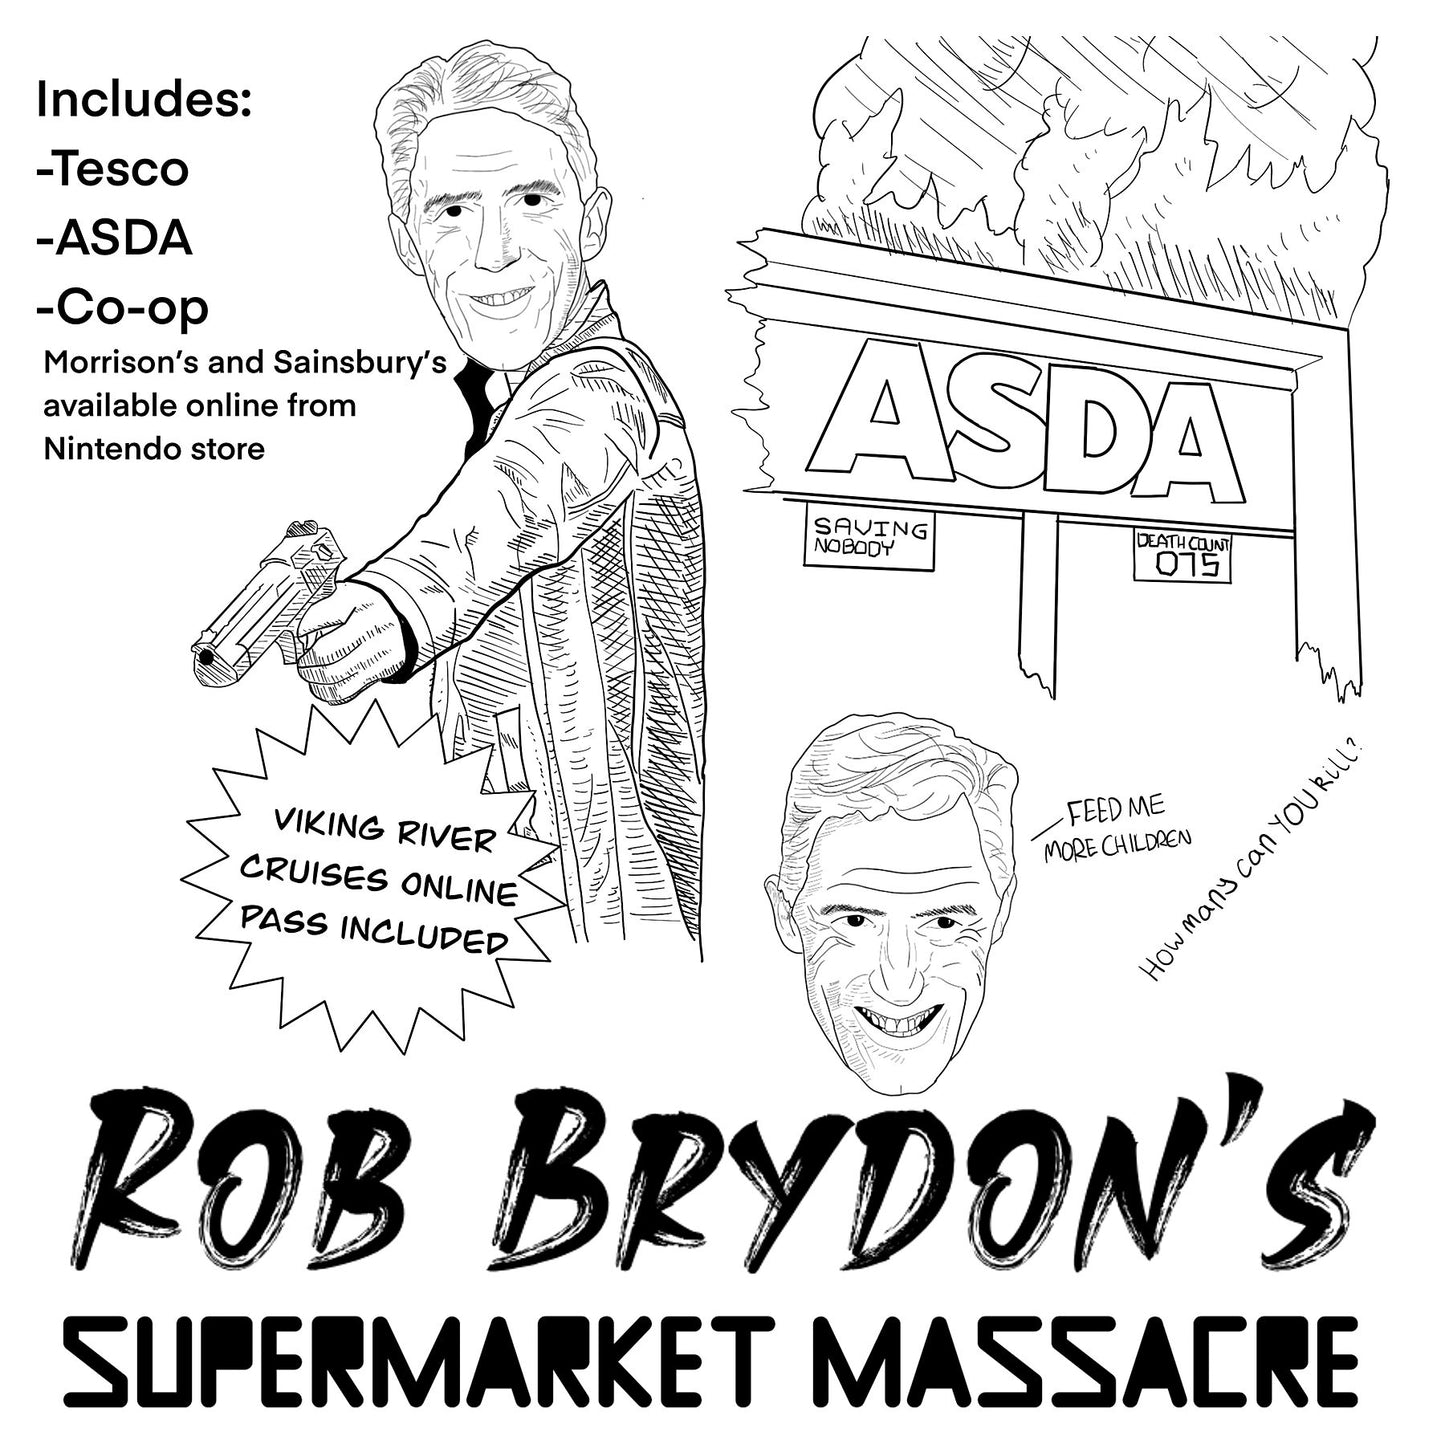 Video game cover featuring Rob Bryden pointing a gun